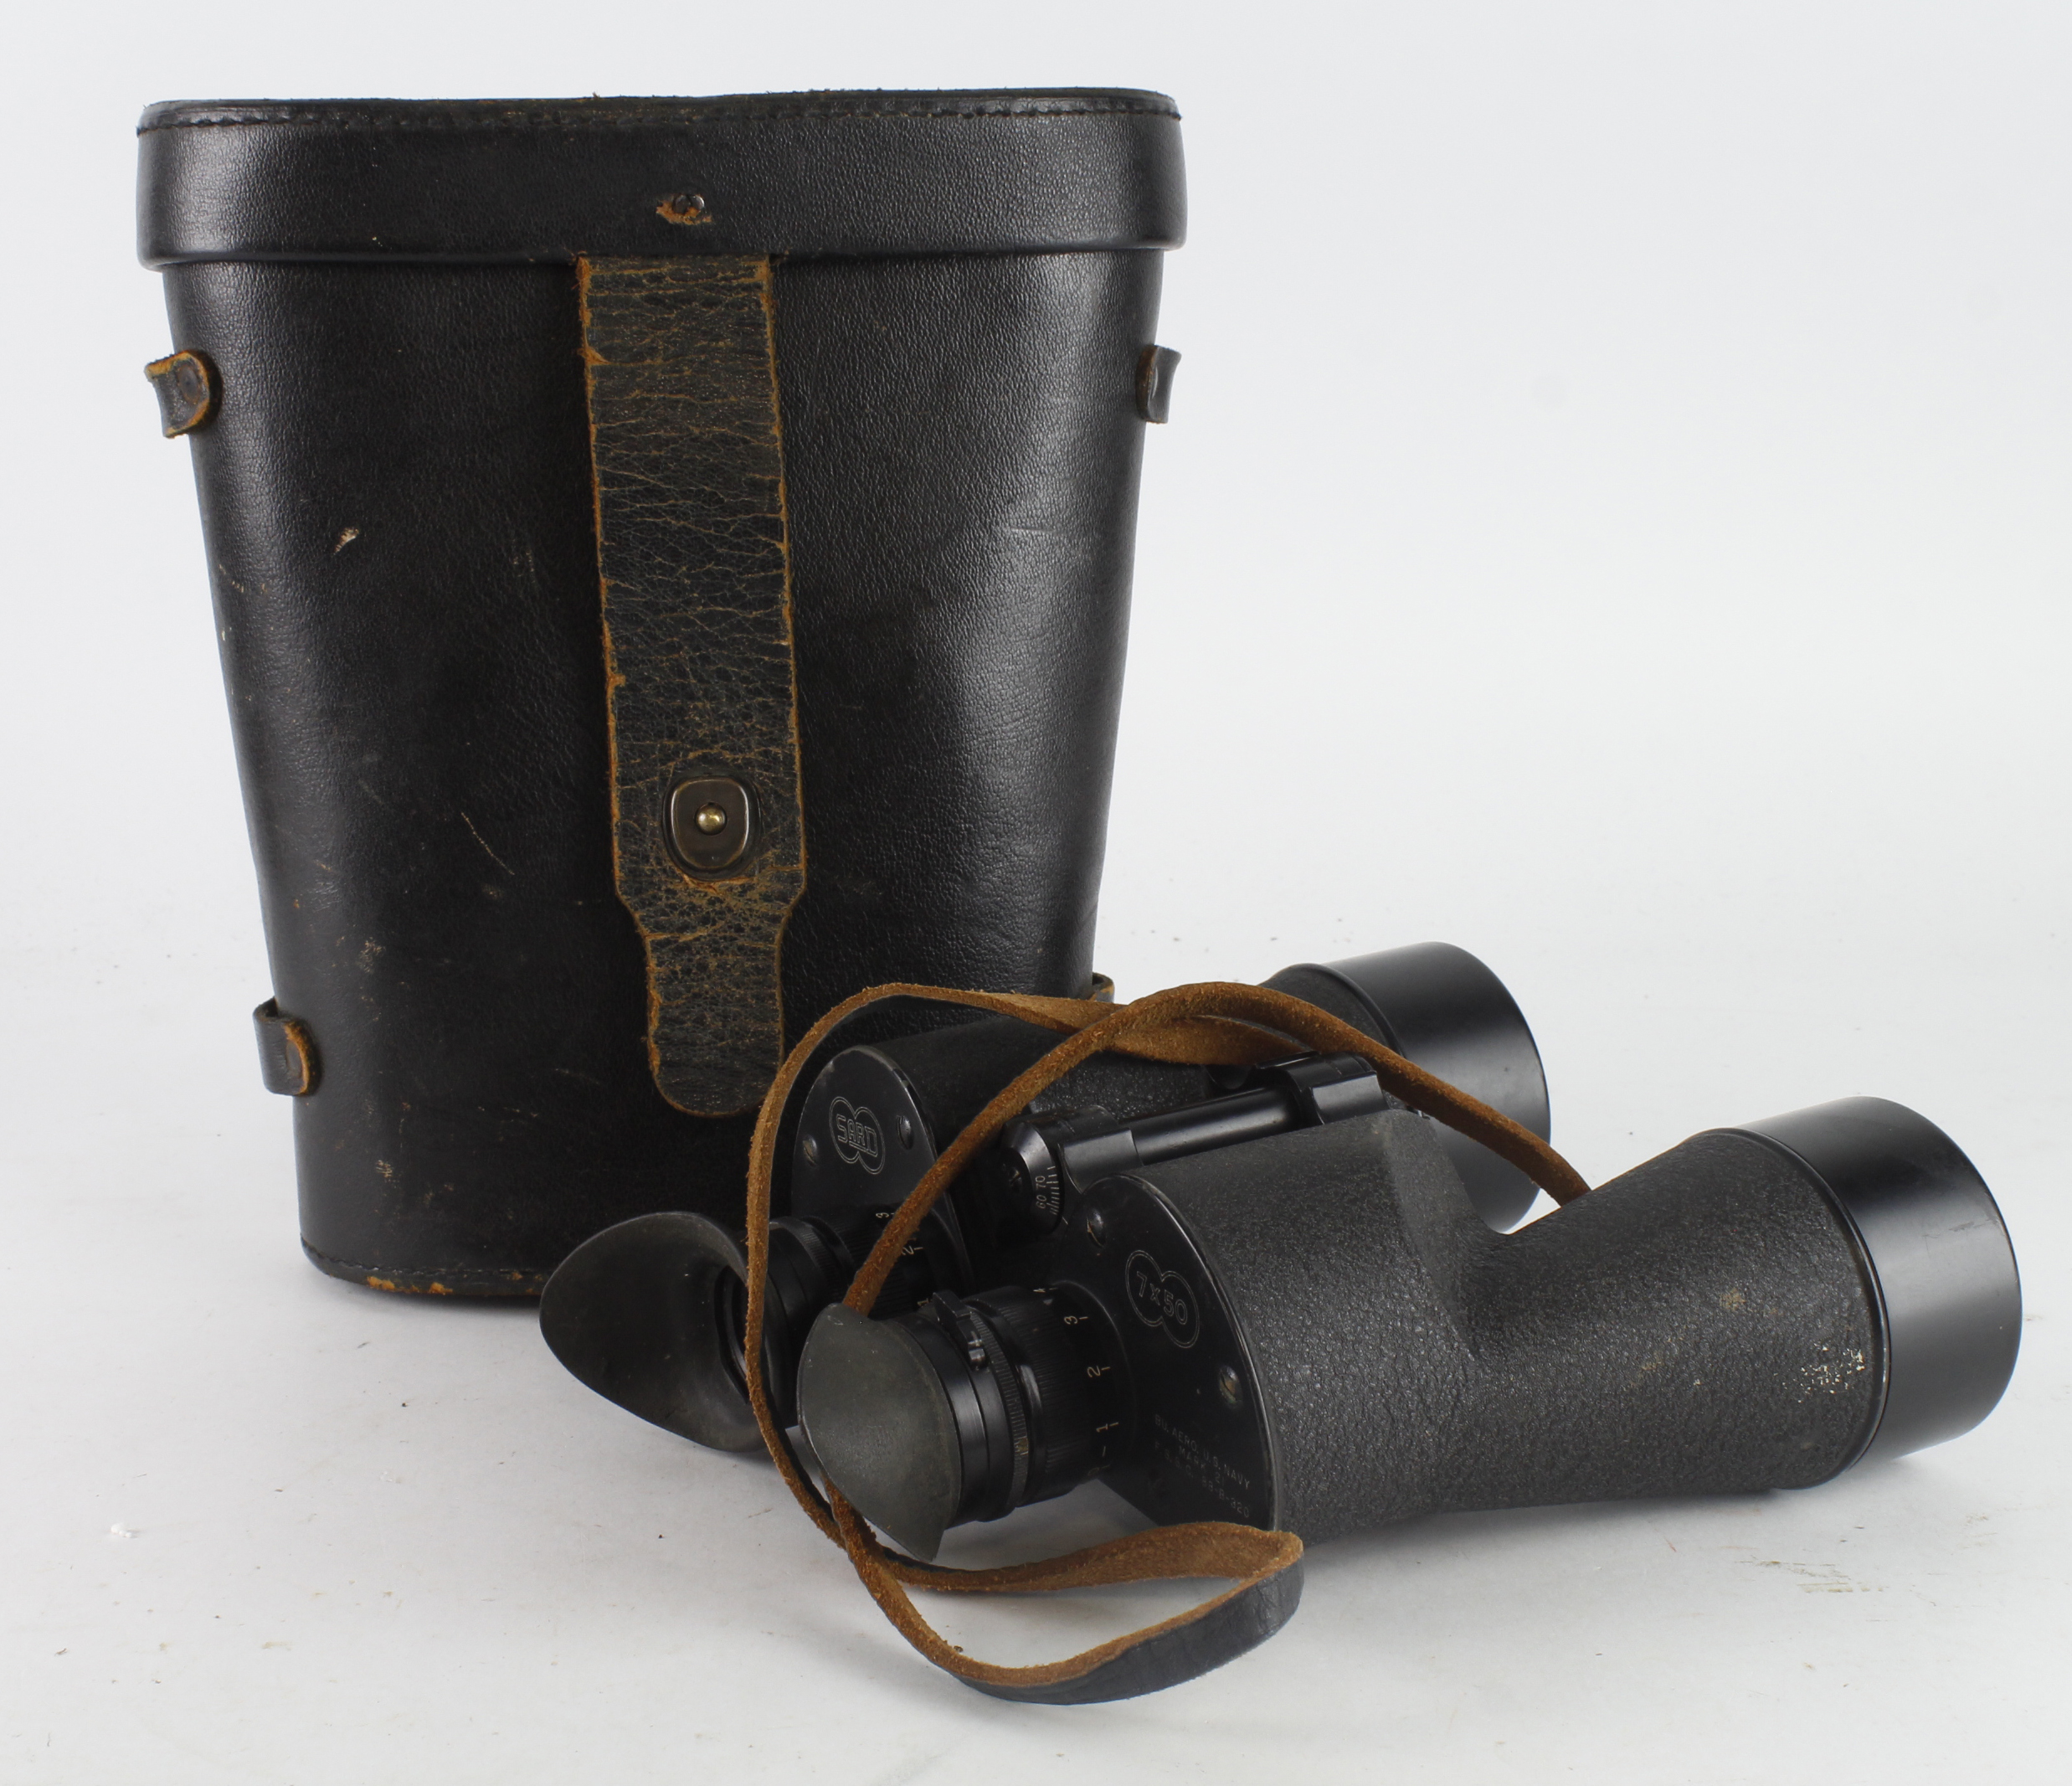 WW2 US Navy 7x50 binoculars in lovely condition made by SARD New York in their black leather case.